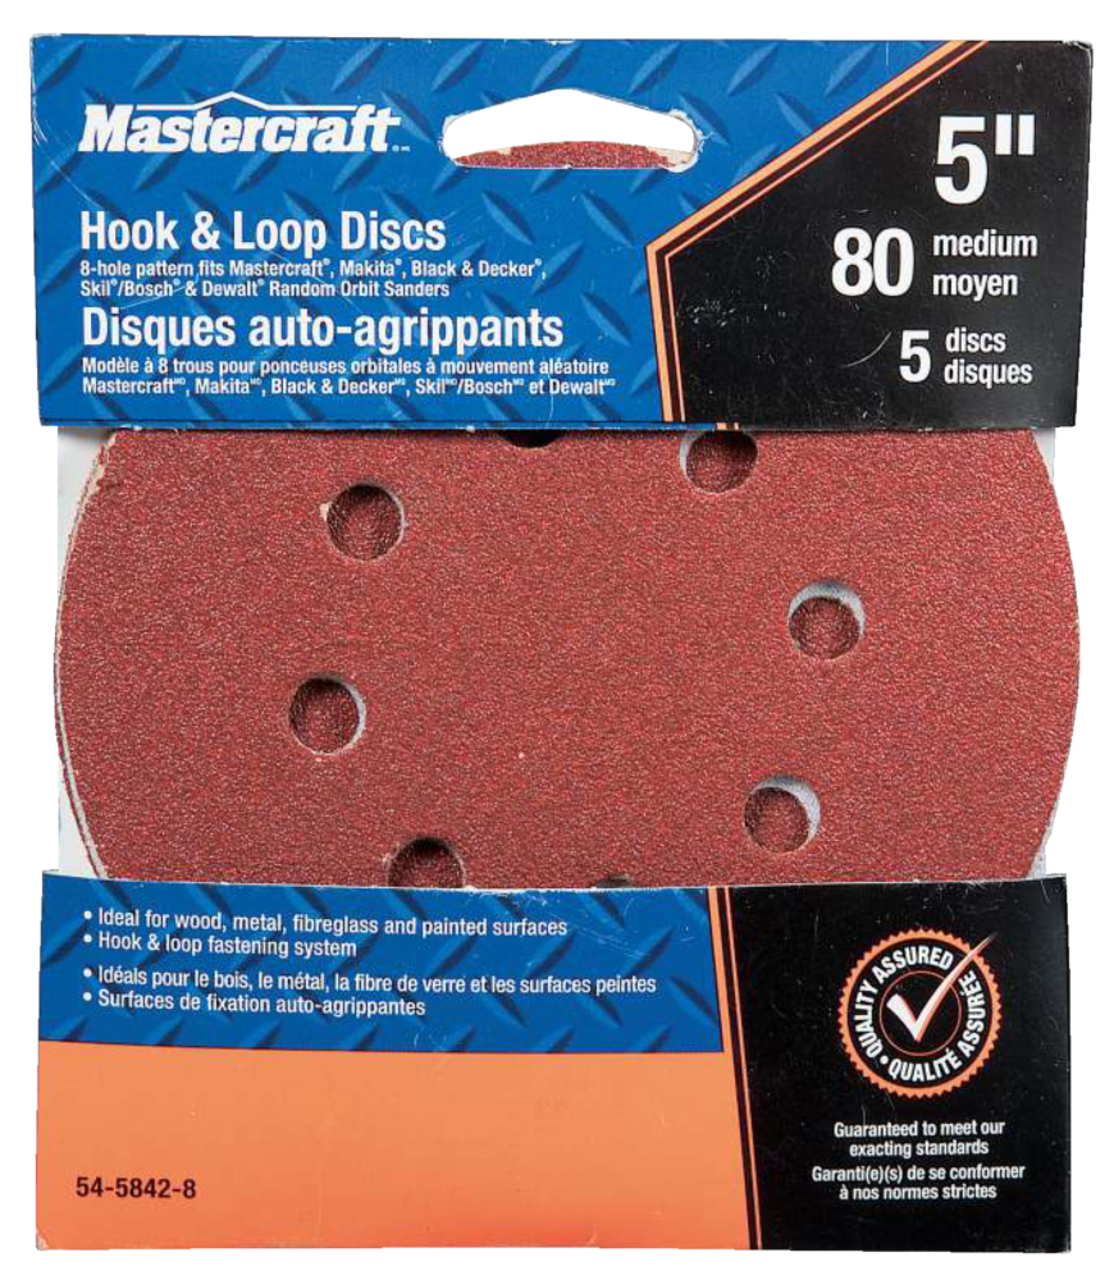 https://media-www.canadiantire.ca/product/fixing/tools/power-tool-accessories/0545842/8-hole-sanding-disc-80-grit-5-5-pack-d58fc2fc-3b46-4a4e-9246-f7d89090db31.png?imdensity=1&imwidth=640&impolicy=mZoom